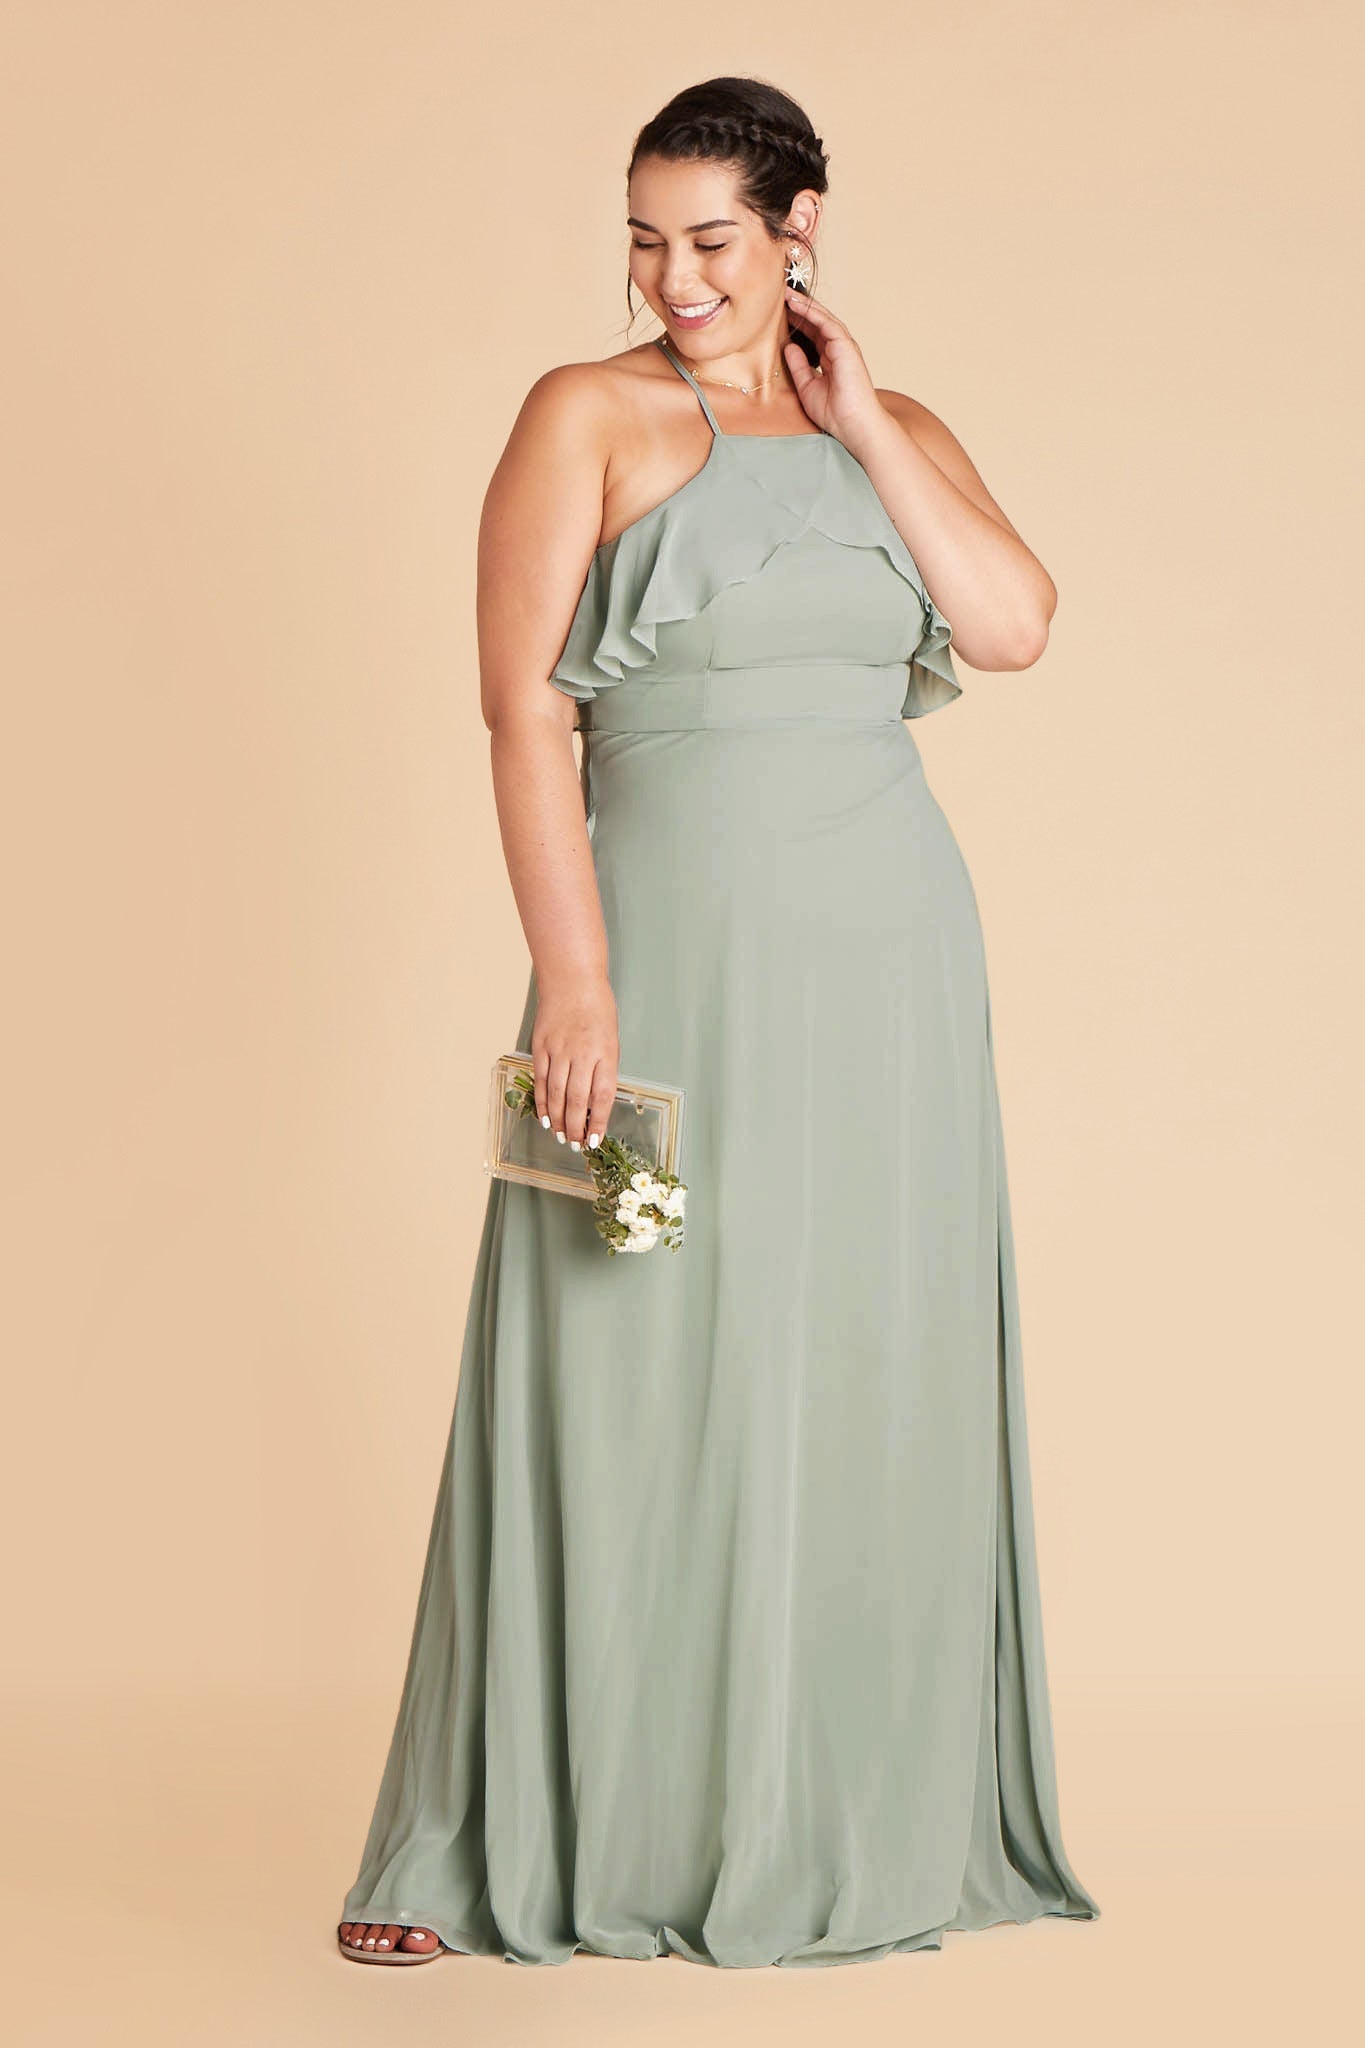 Jules plus size bridesmaid dress in sage green chiffon by Birdy Grey, front view